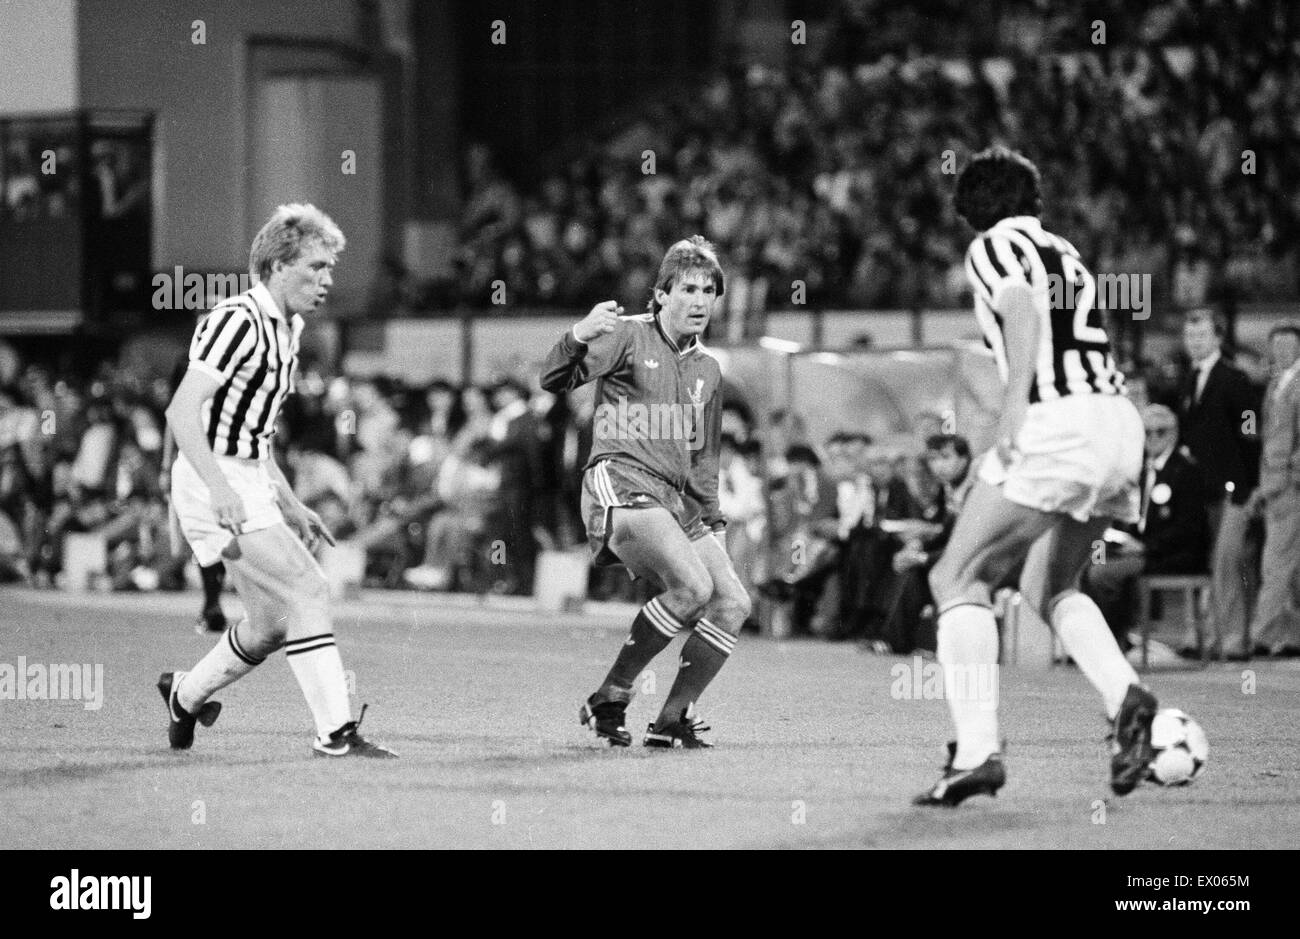 Juventus 1-0 Liverpool, 1985 European Cup Final, Heysel Stadium, Brussels, Belgium, Wednesday 29th May 1985. Match Action. Kenny Dalglish of Liverpool (centre). Stock Photo